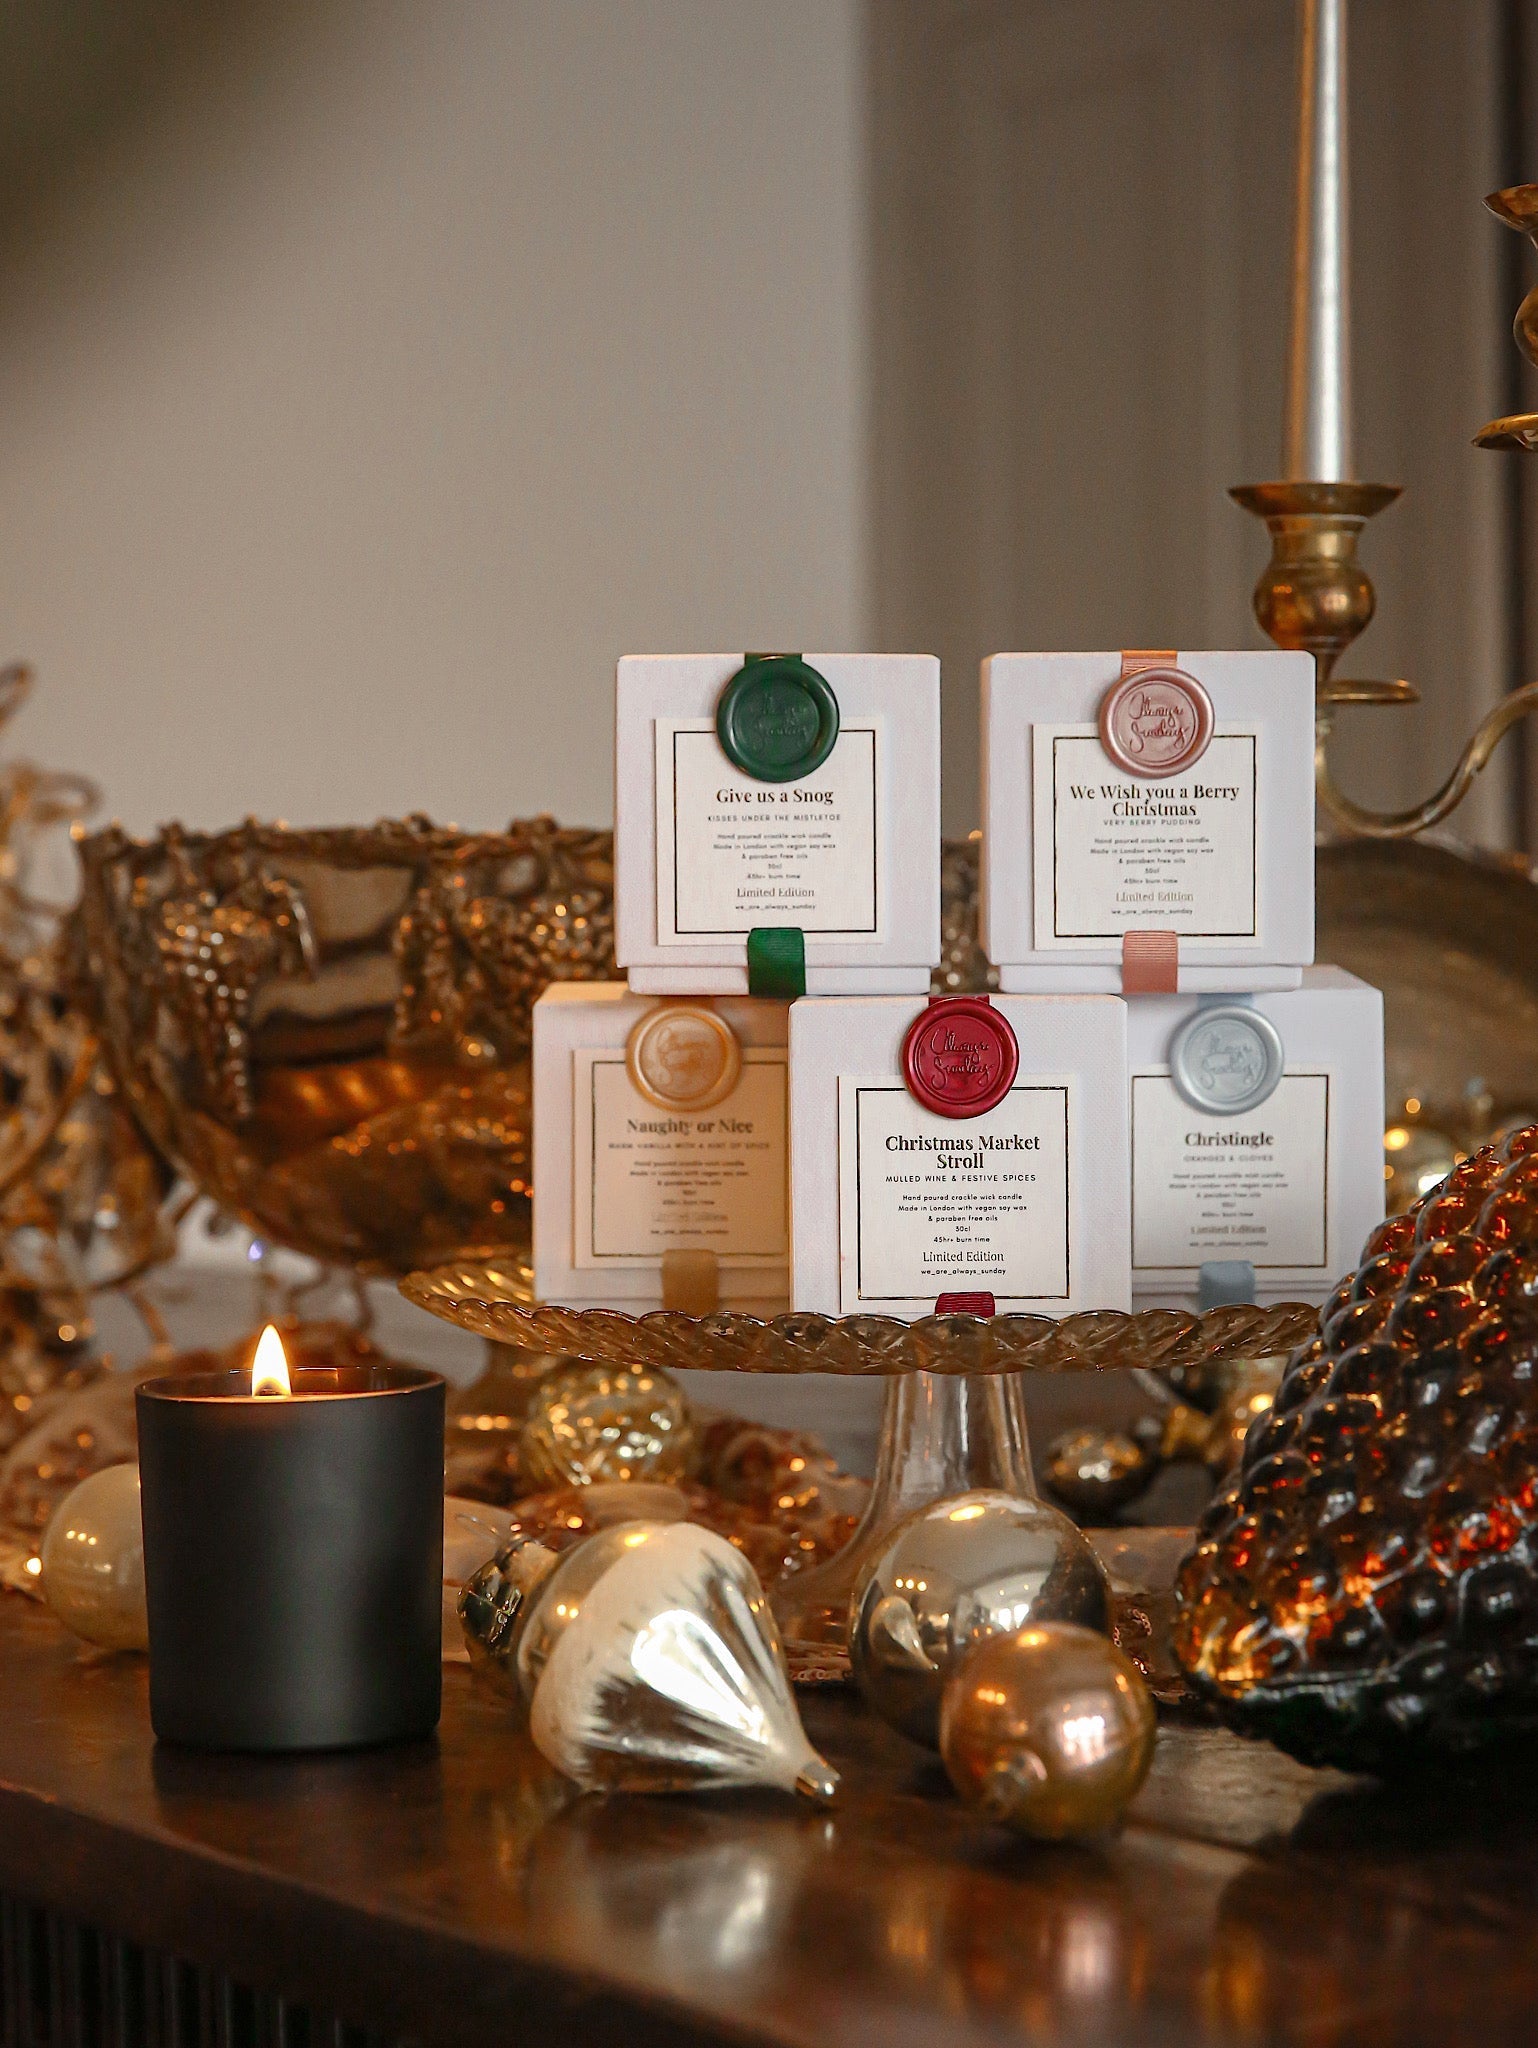 Christingle Limited Edition Candle by Always Sunday